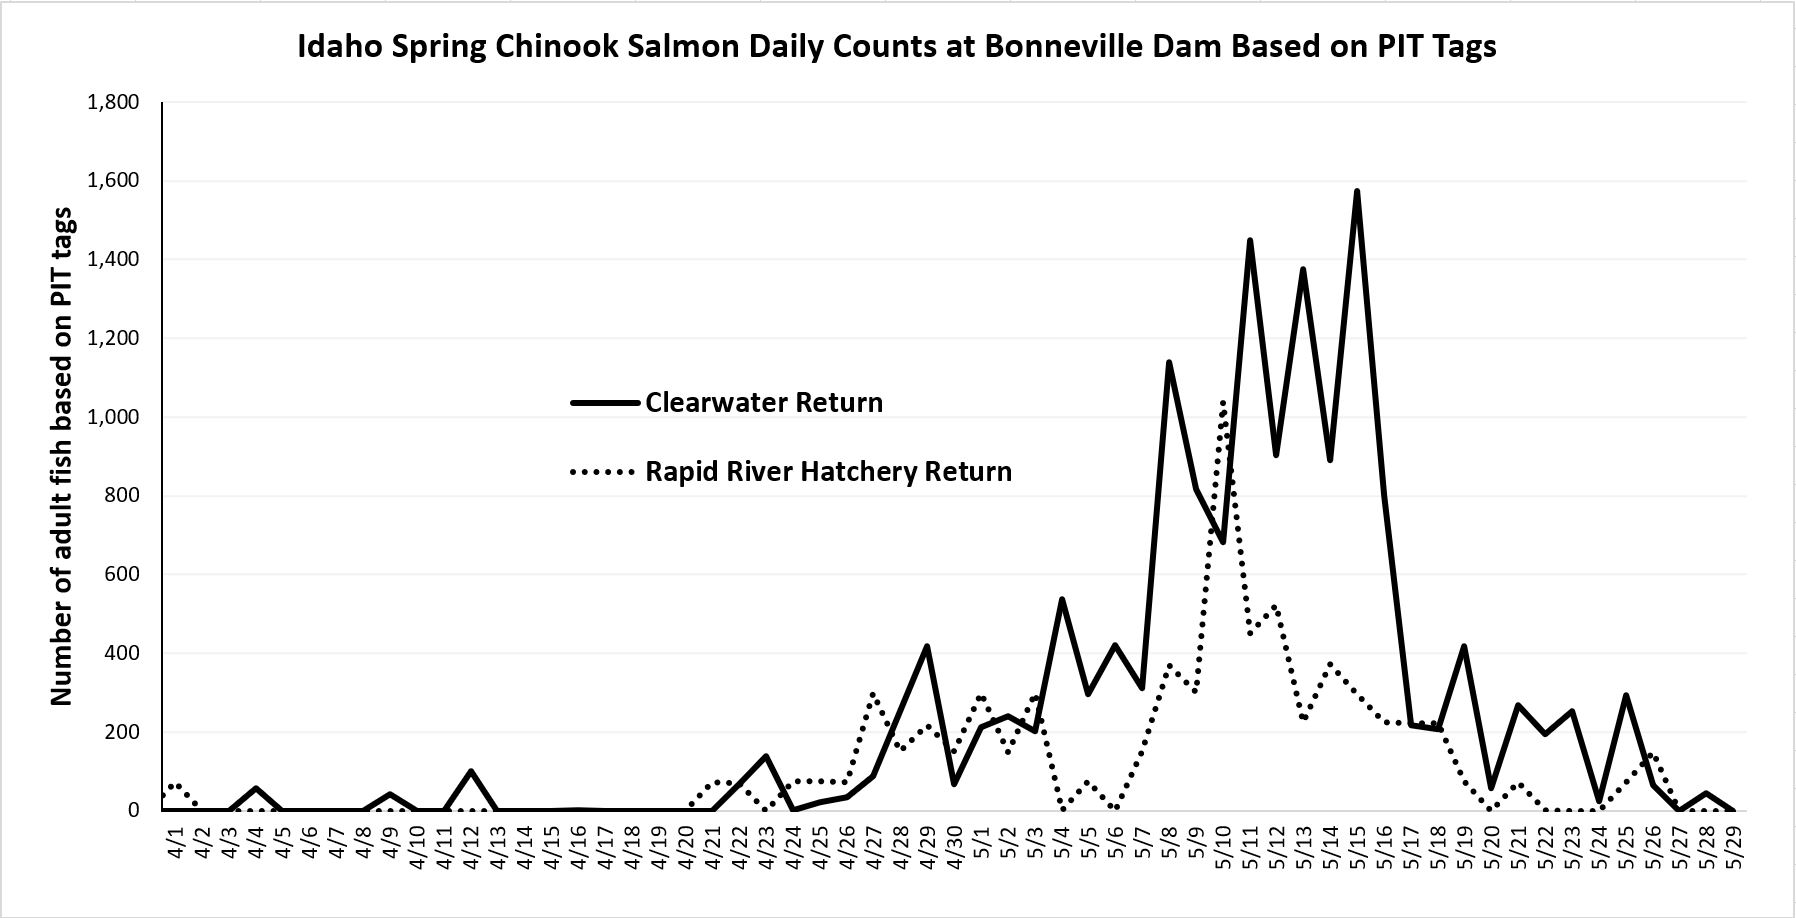 daily chinook counts at bonneville based on PIT tags 3-29-30